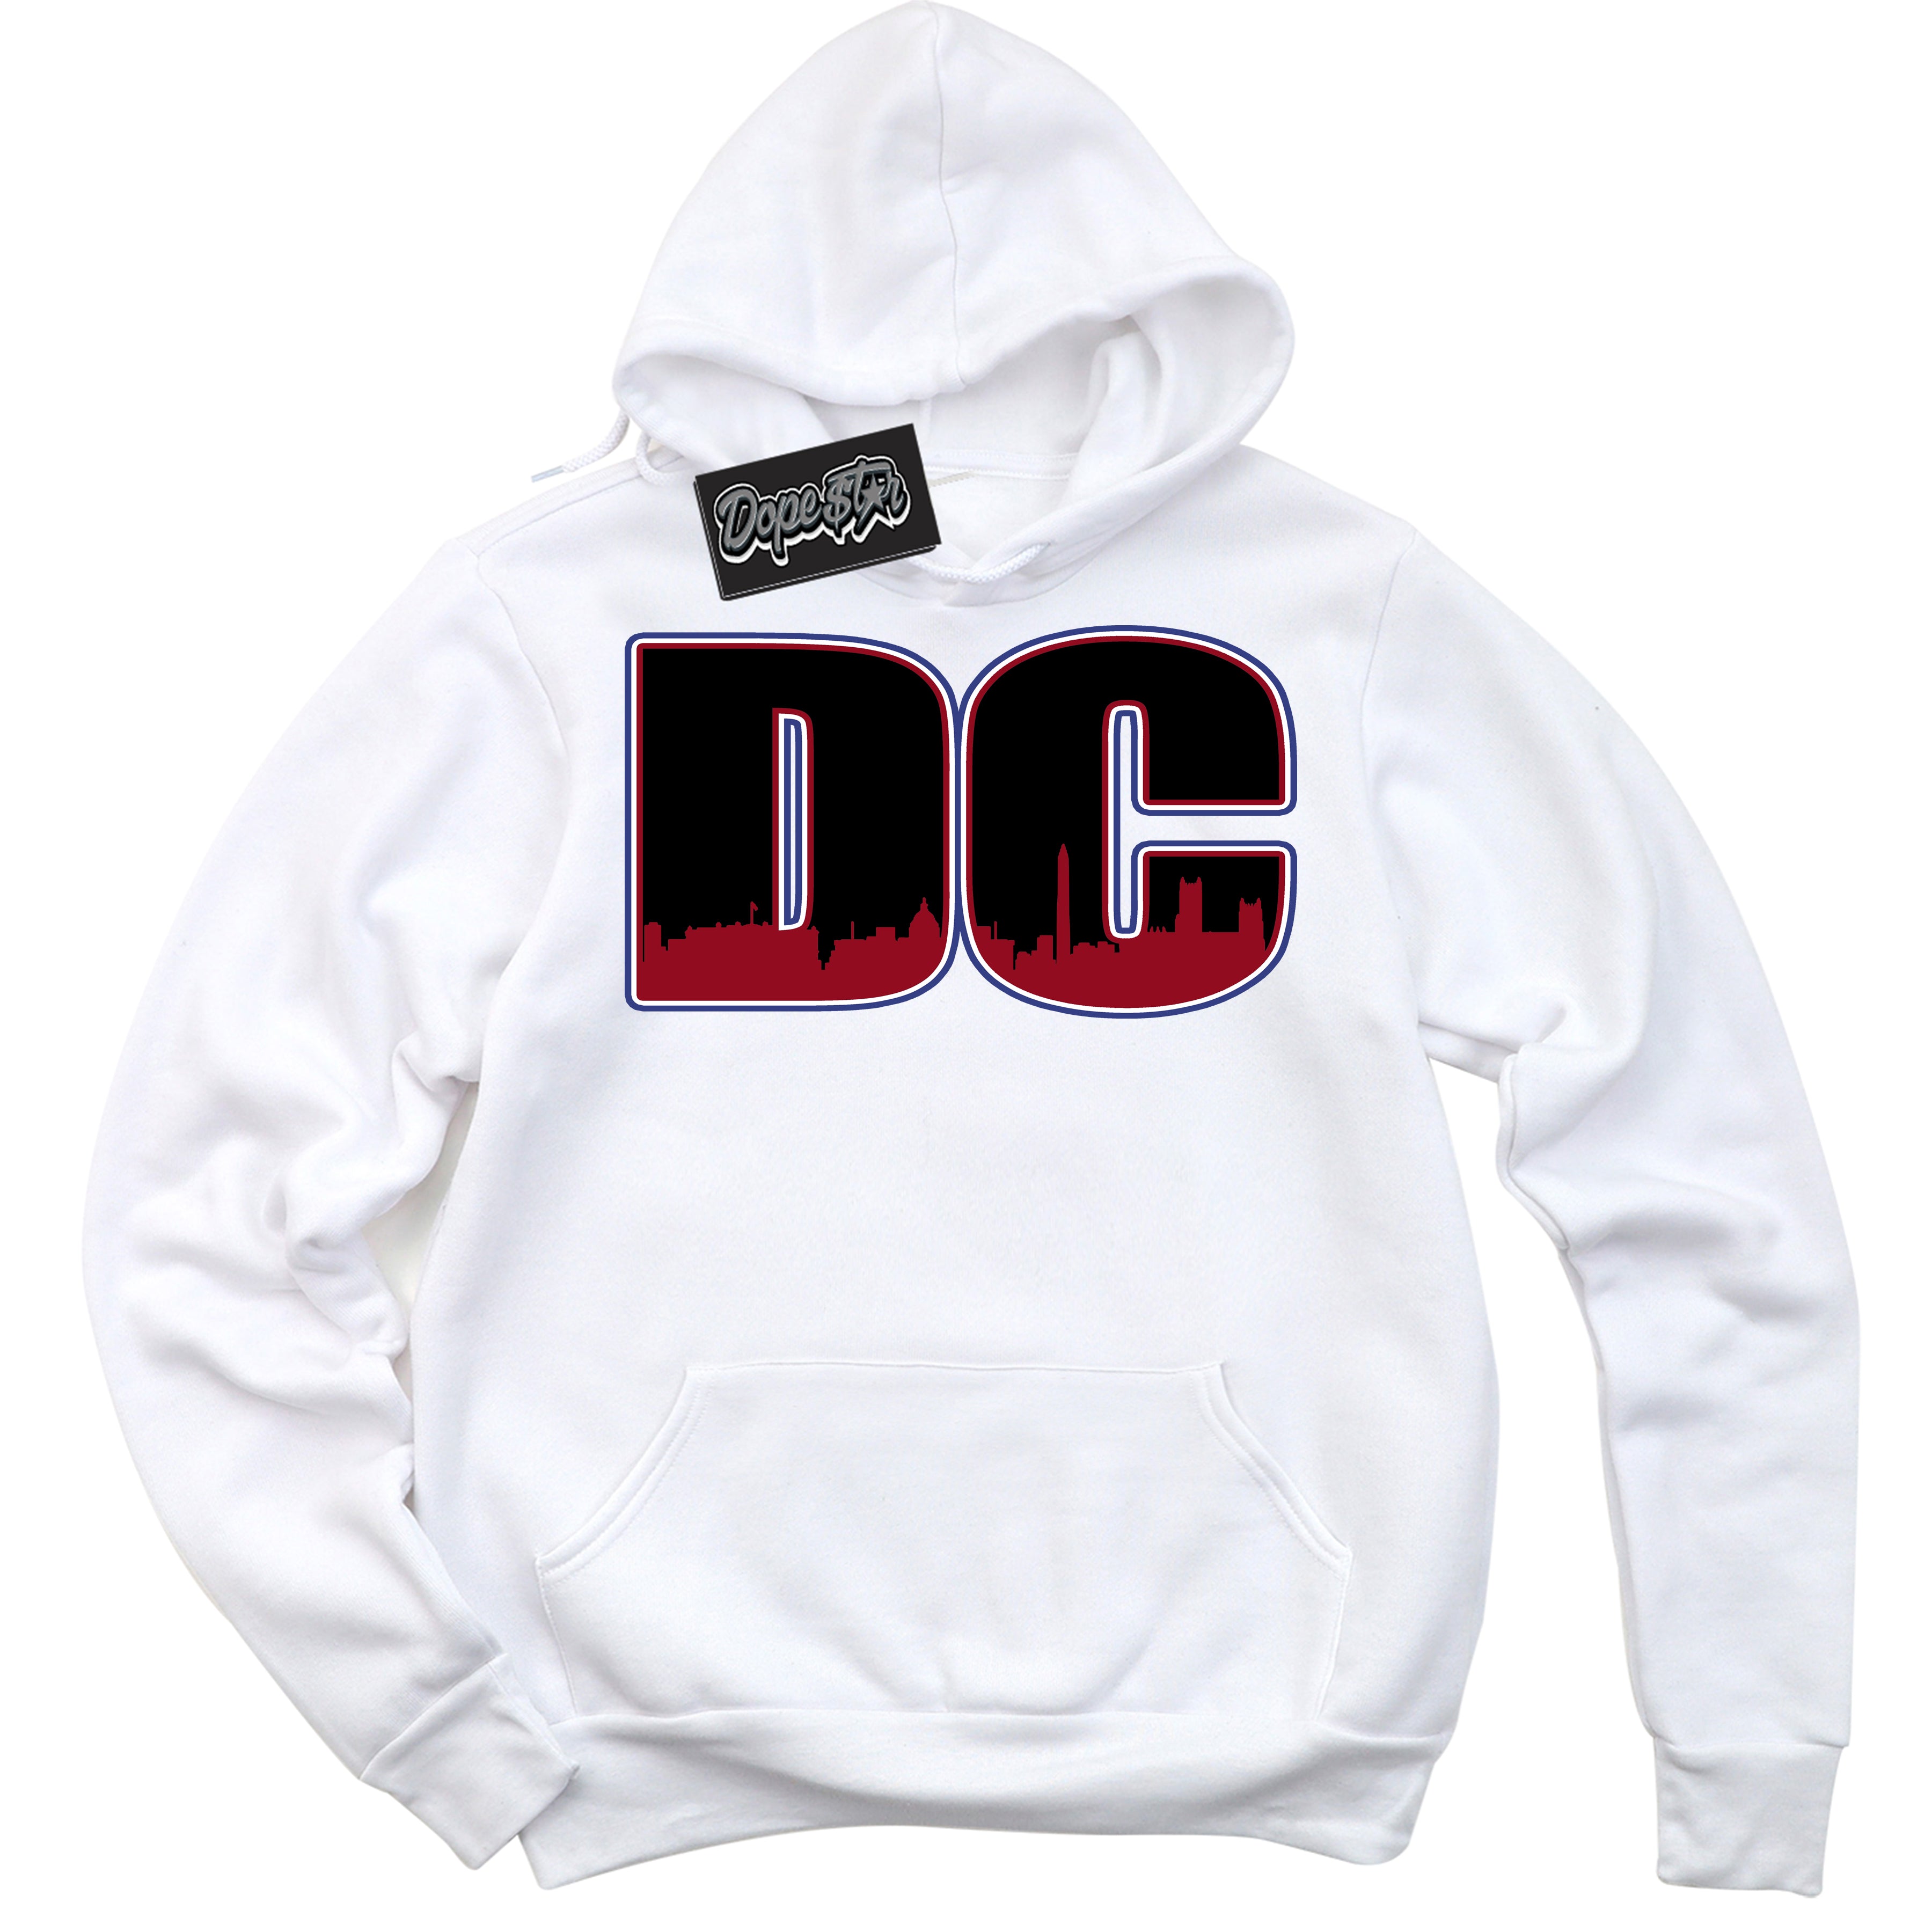 Cool White Hoodie with “ DC ”  design that Perfectly Matches Playoffs 8s Sneakers.